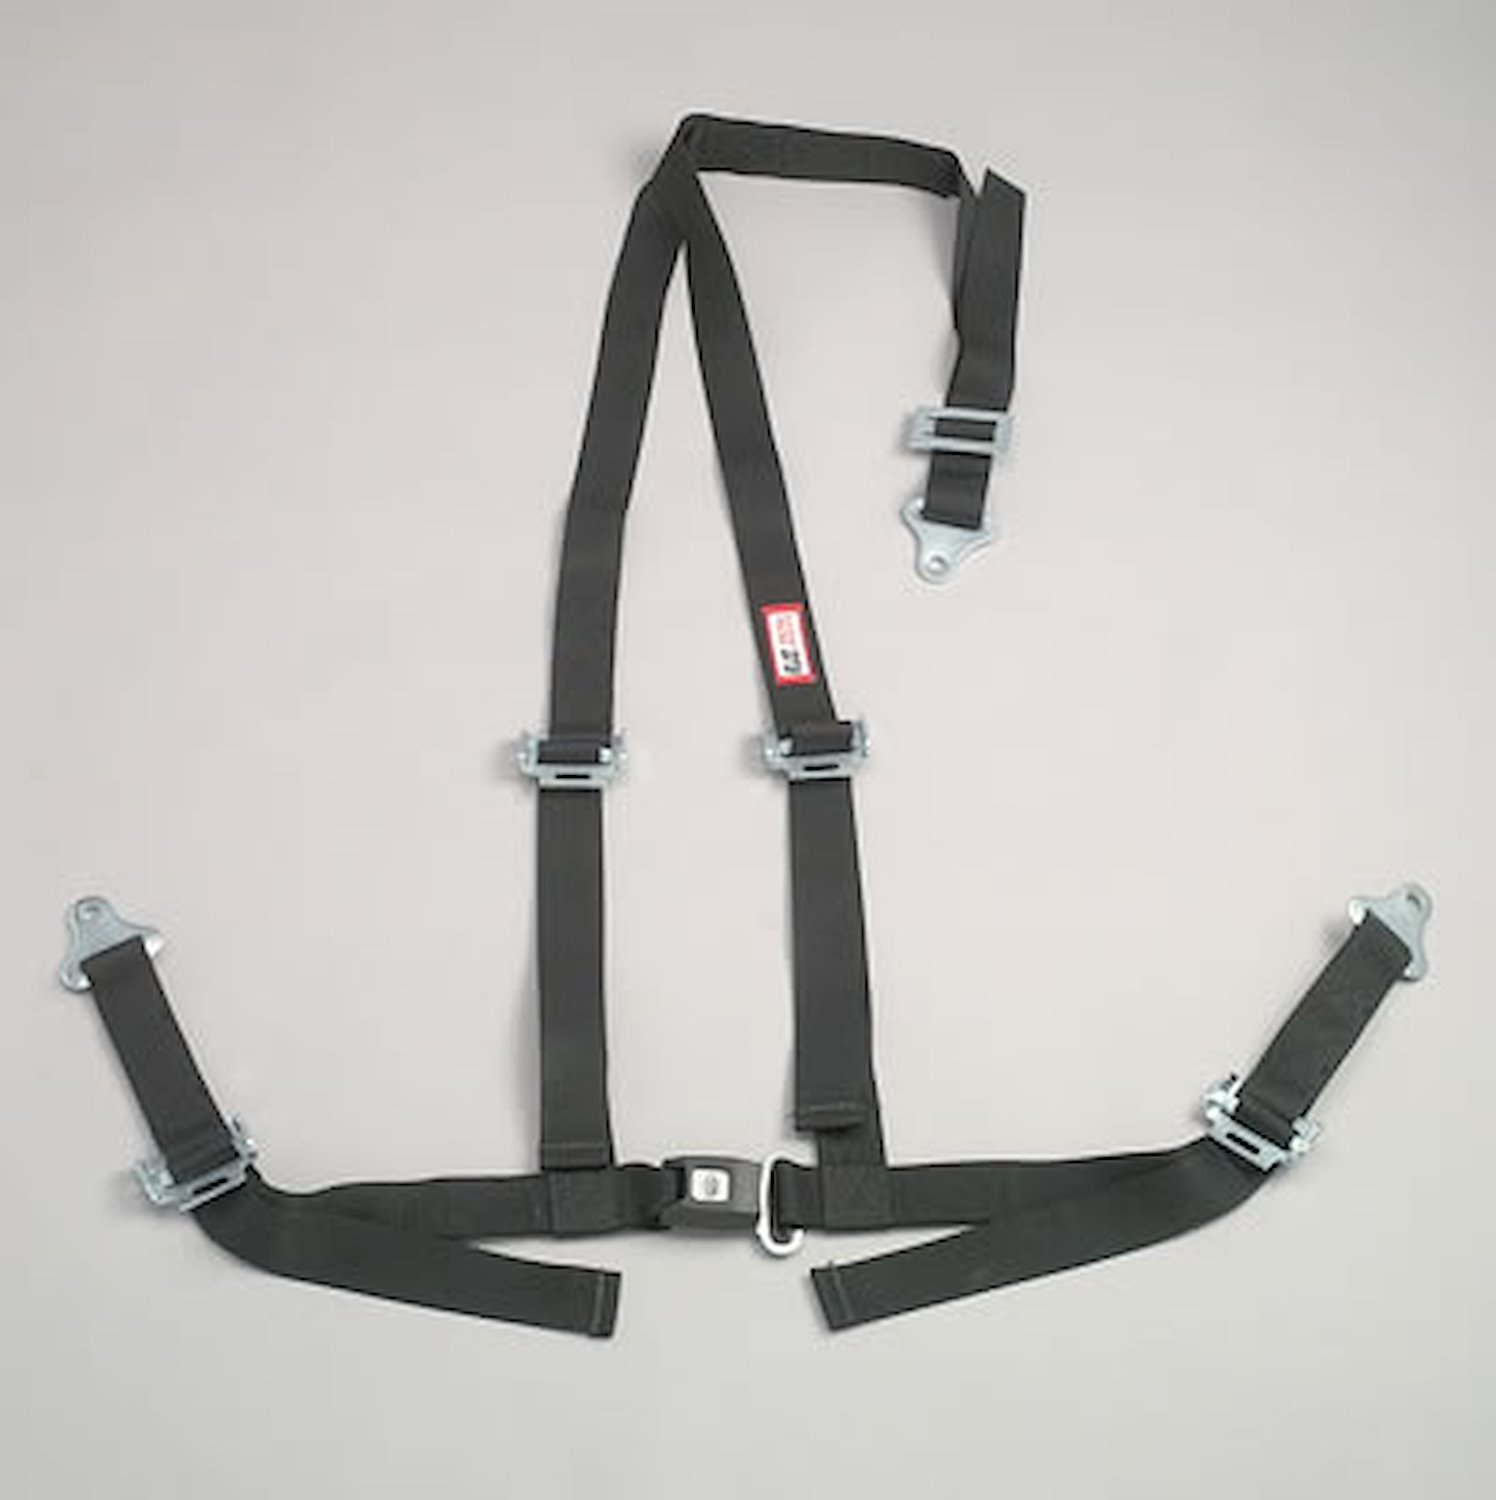 NON-SFI B&T HARNESS 2 PULL UP Lap Belt 2 S. H. V ROLL BAR Mount ALL WRAP ENDS w/STERNUM STRAP YELLOW